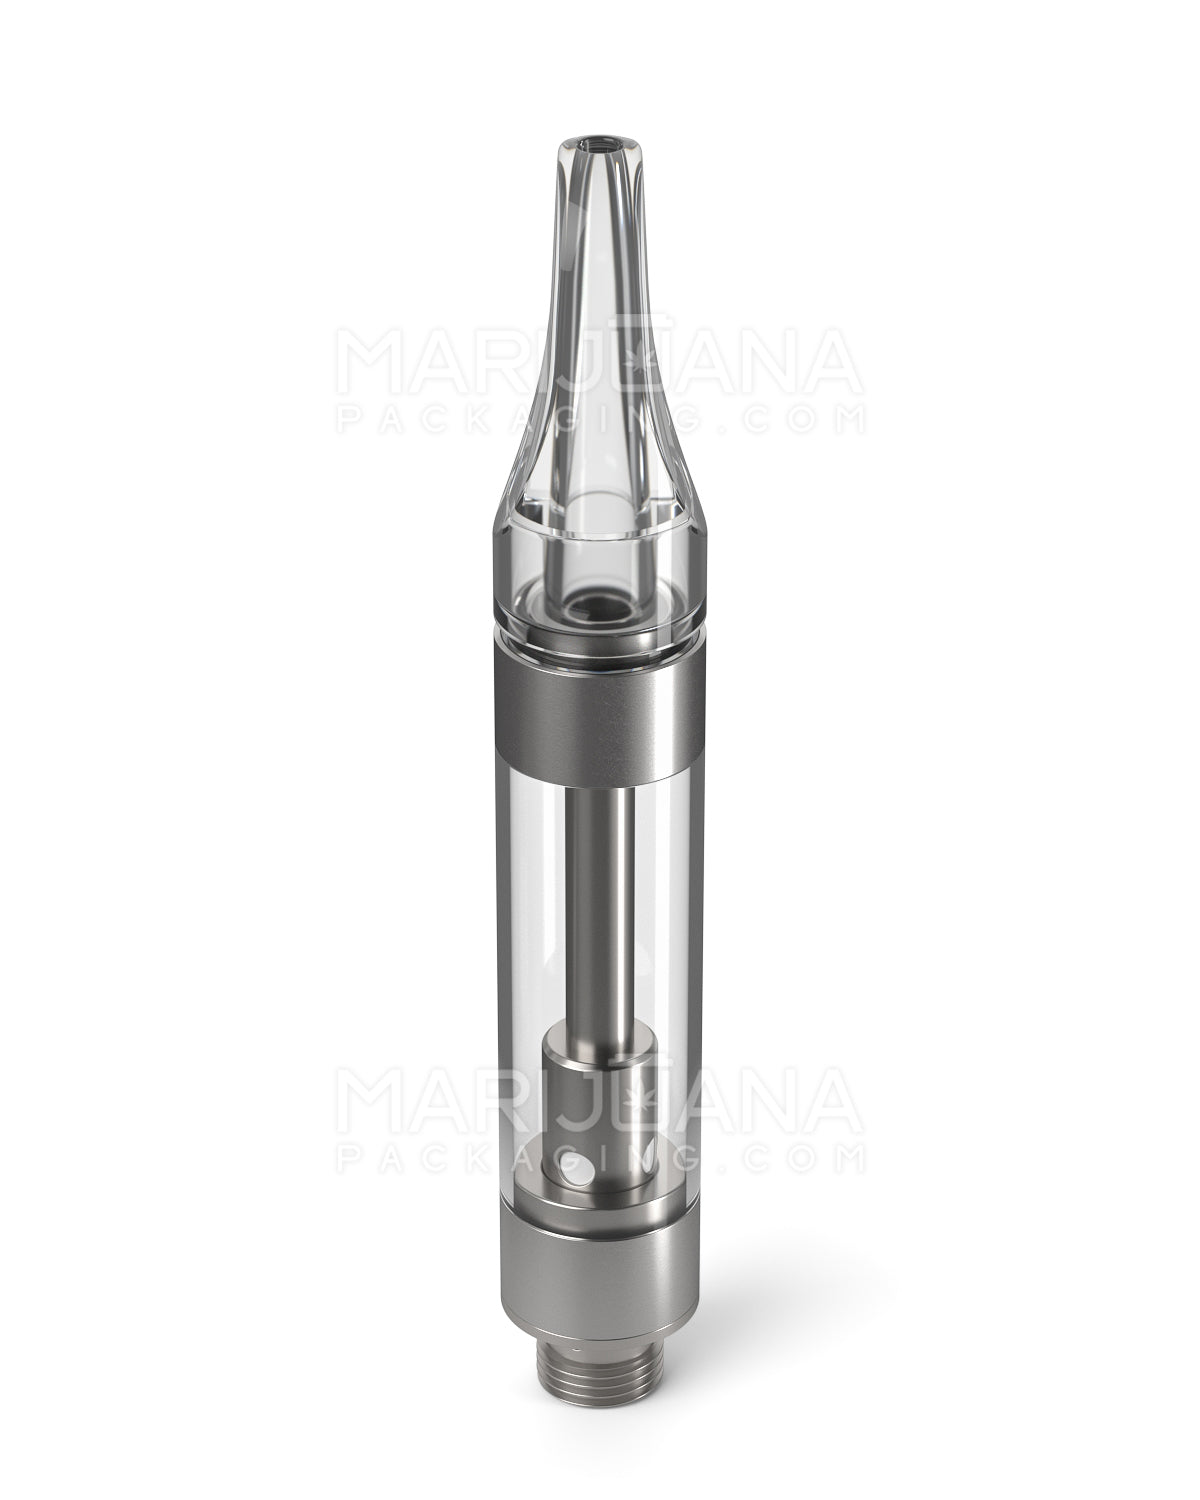 CCELL | Liquid6 Reactor Plastic Vape Cartridge with Clear Plastic Mouthpiece | 1mL - Press On - 100 Count - 4